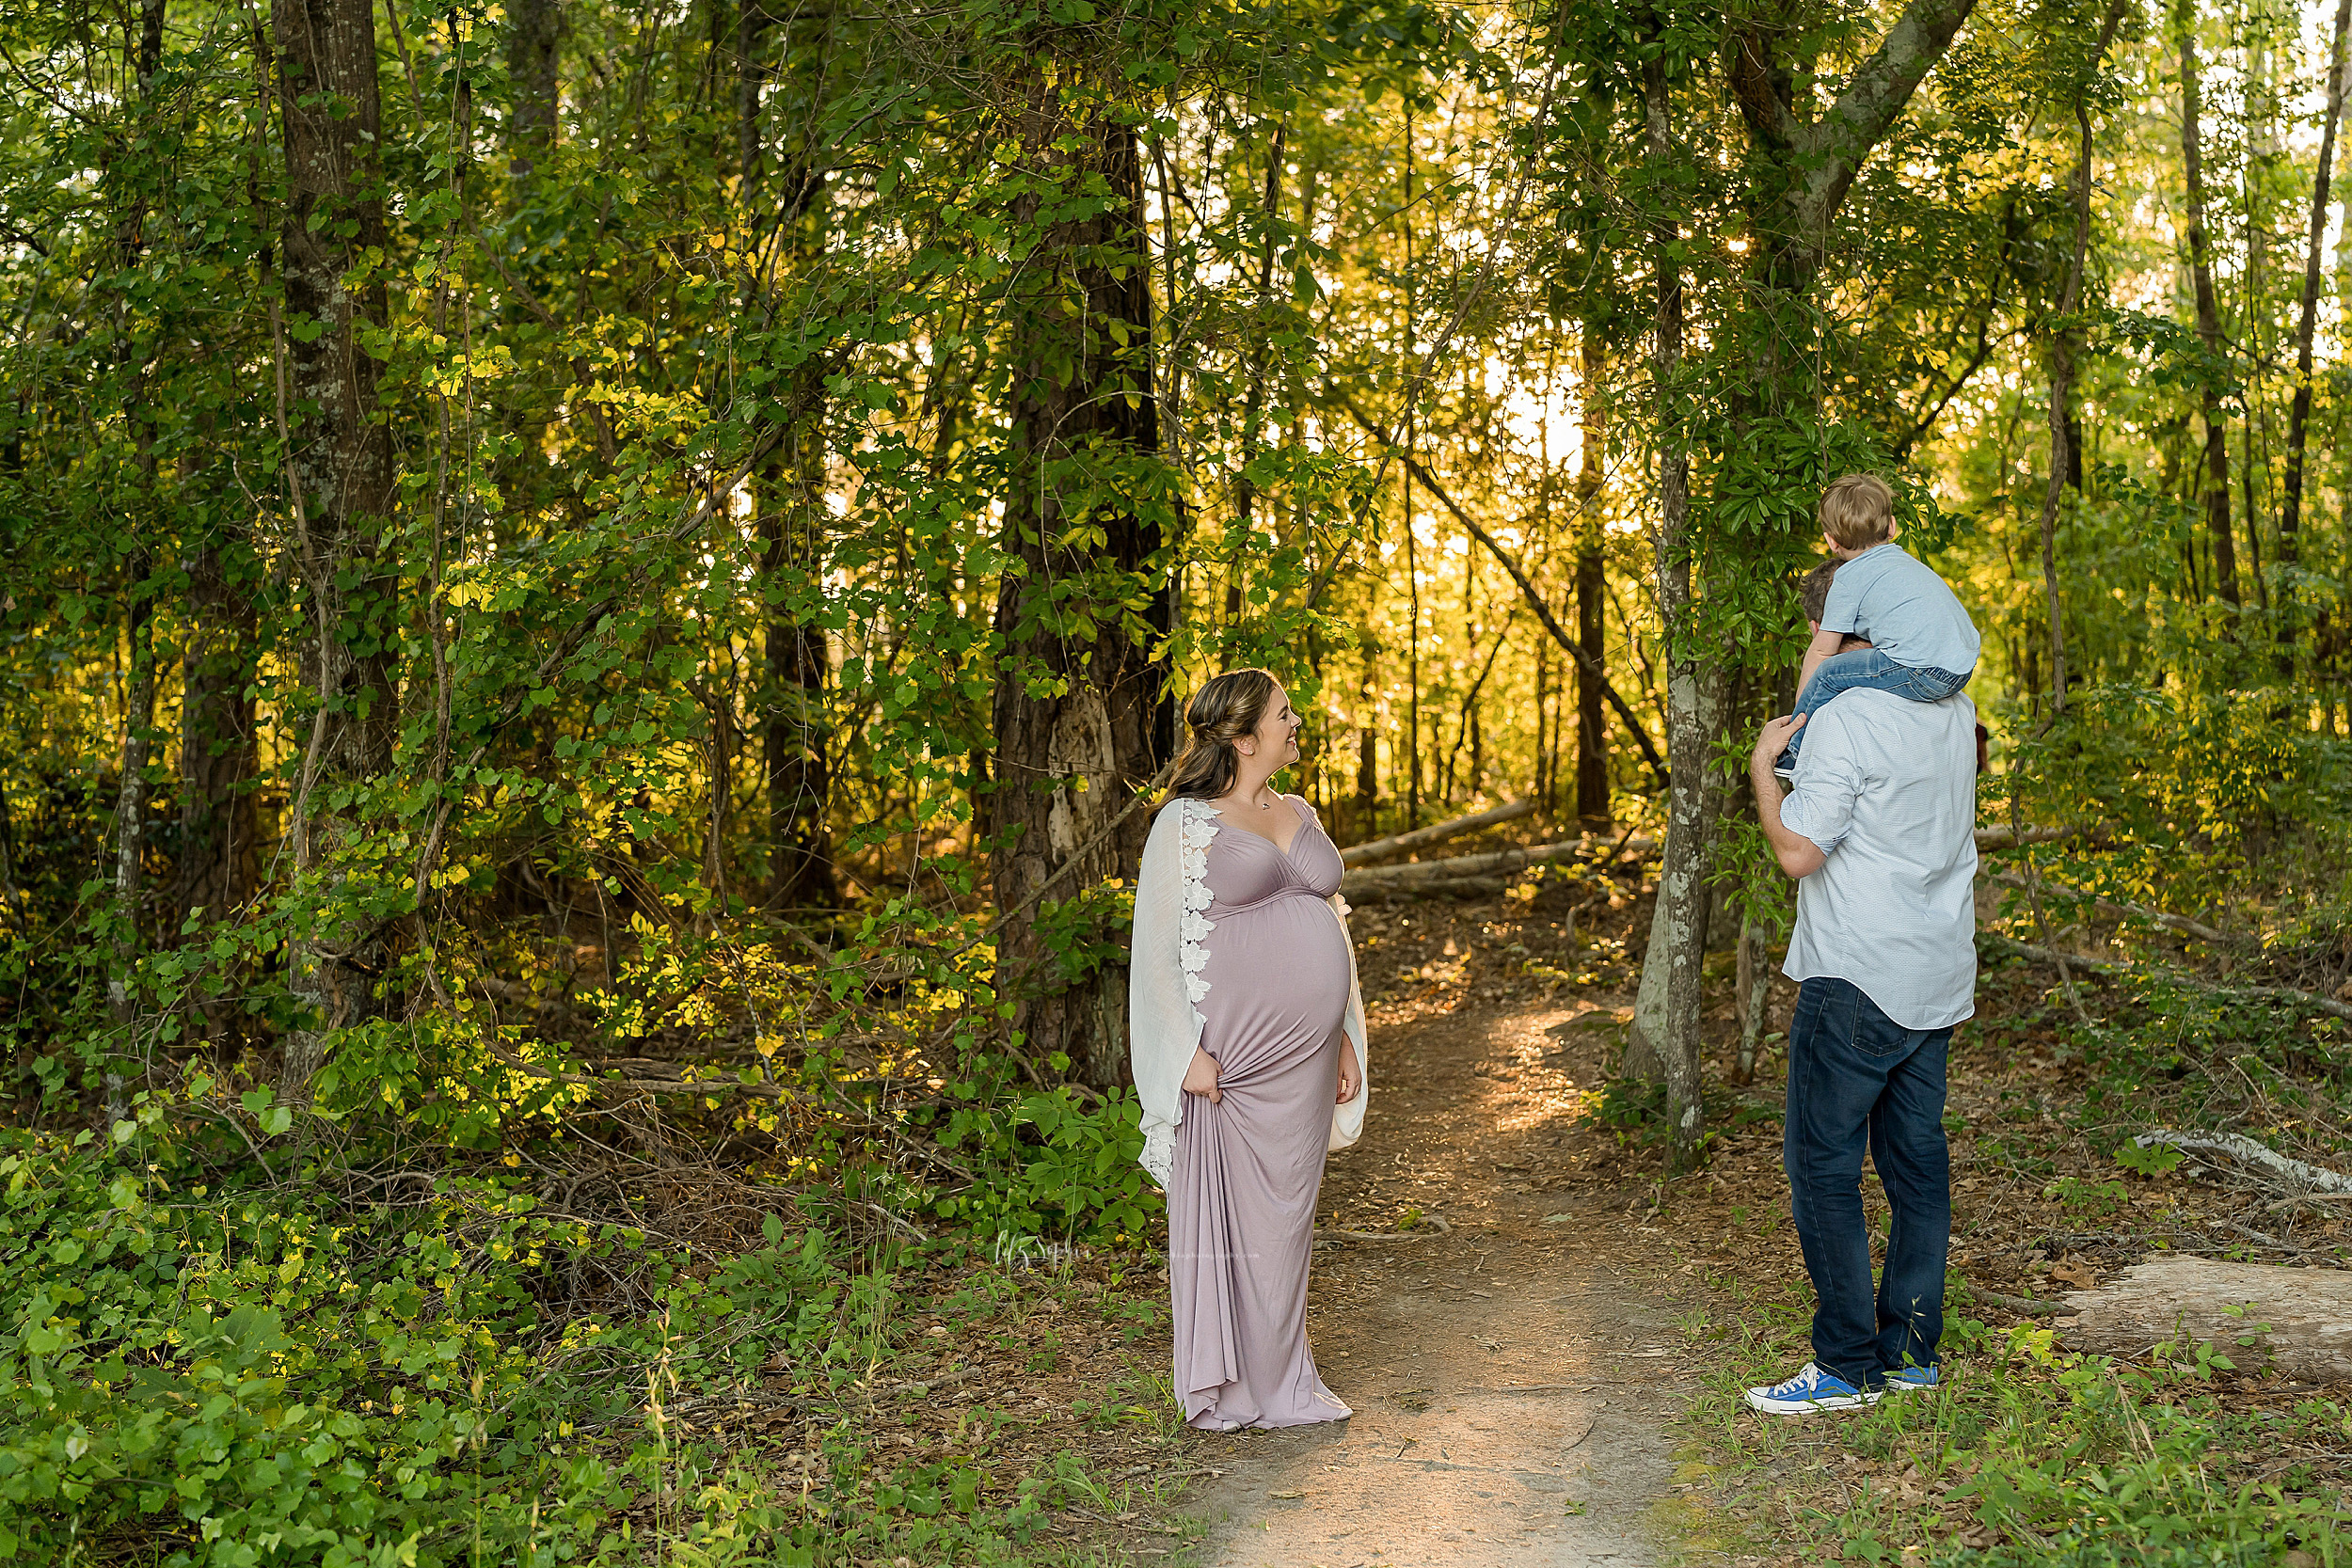 atlanta-brookhaven-decatur-candler-park-sandy-springs-buckhead-virginia-highlands-west-end-decatur-lily-sophia-photography-family-big-brother-expecting-newborn-baby-girl-couples-family-maternity-outdoor-session_1594.jpg